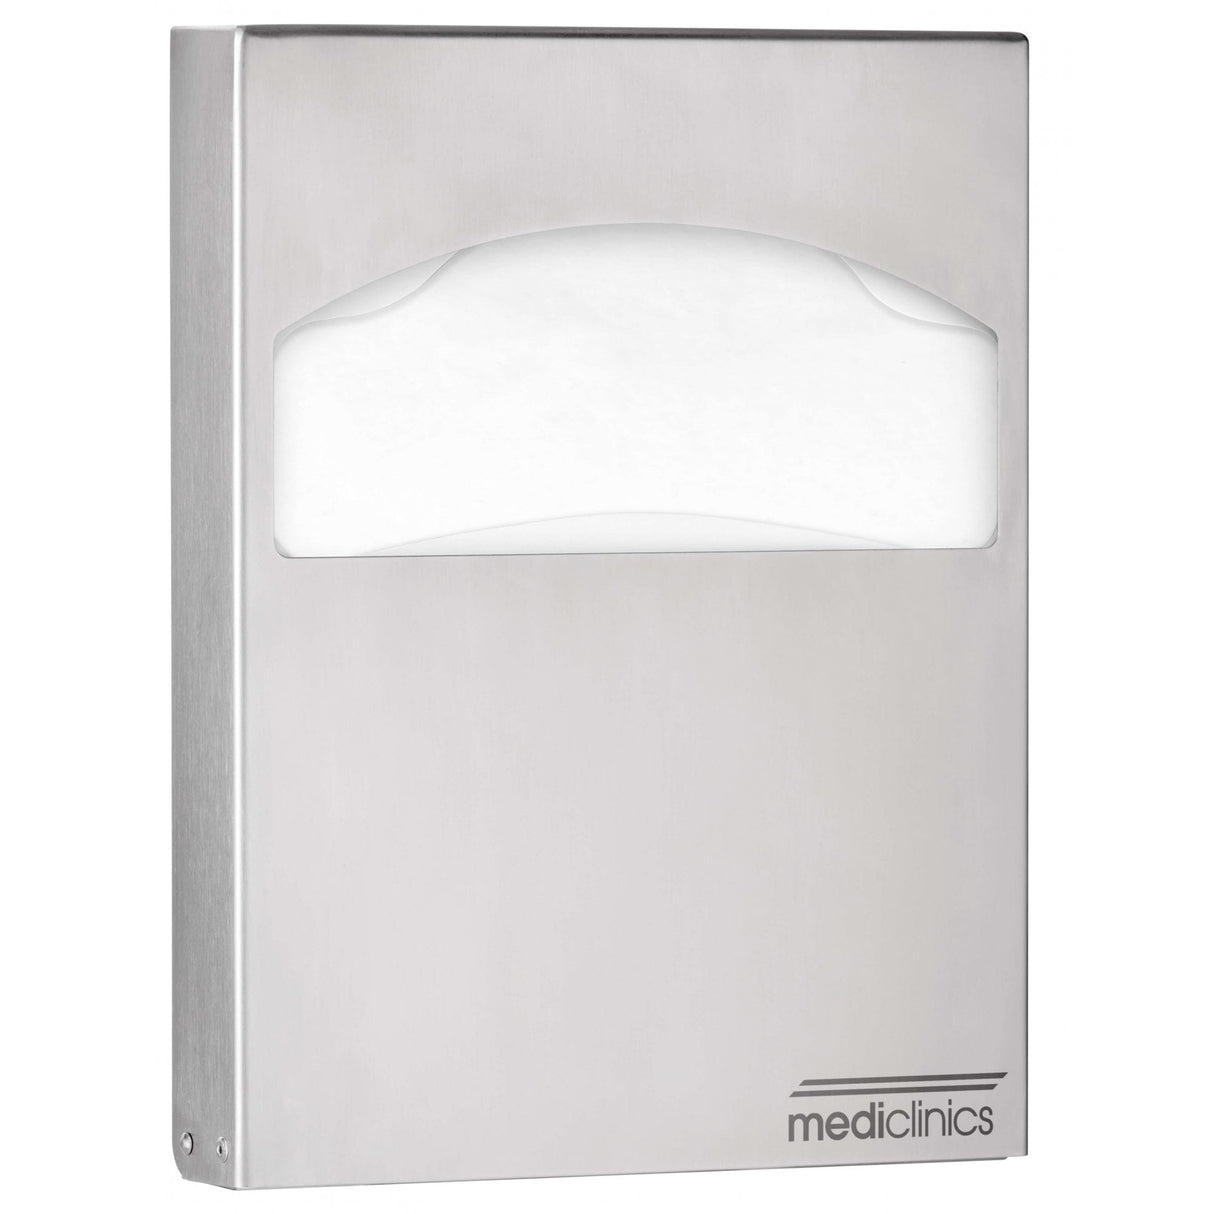 Mediclinics Wall Mounted Toilet Seat Cover Dispenser